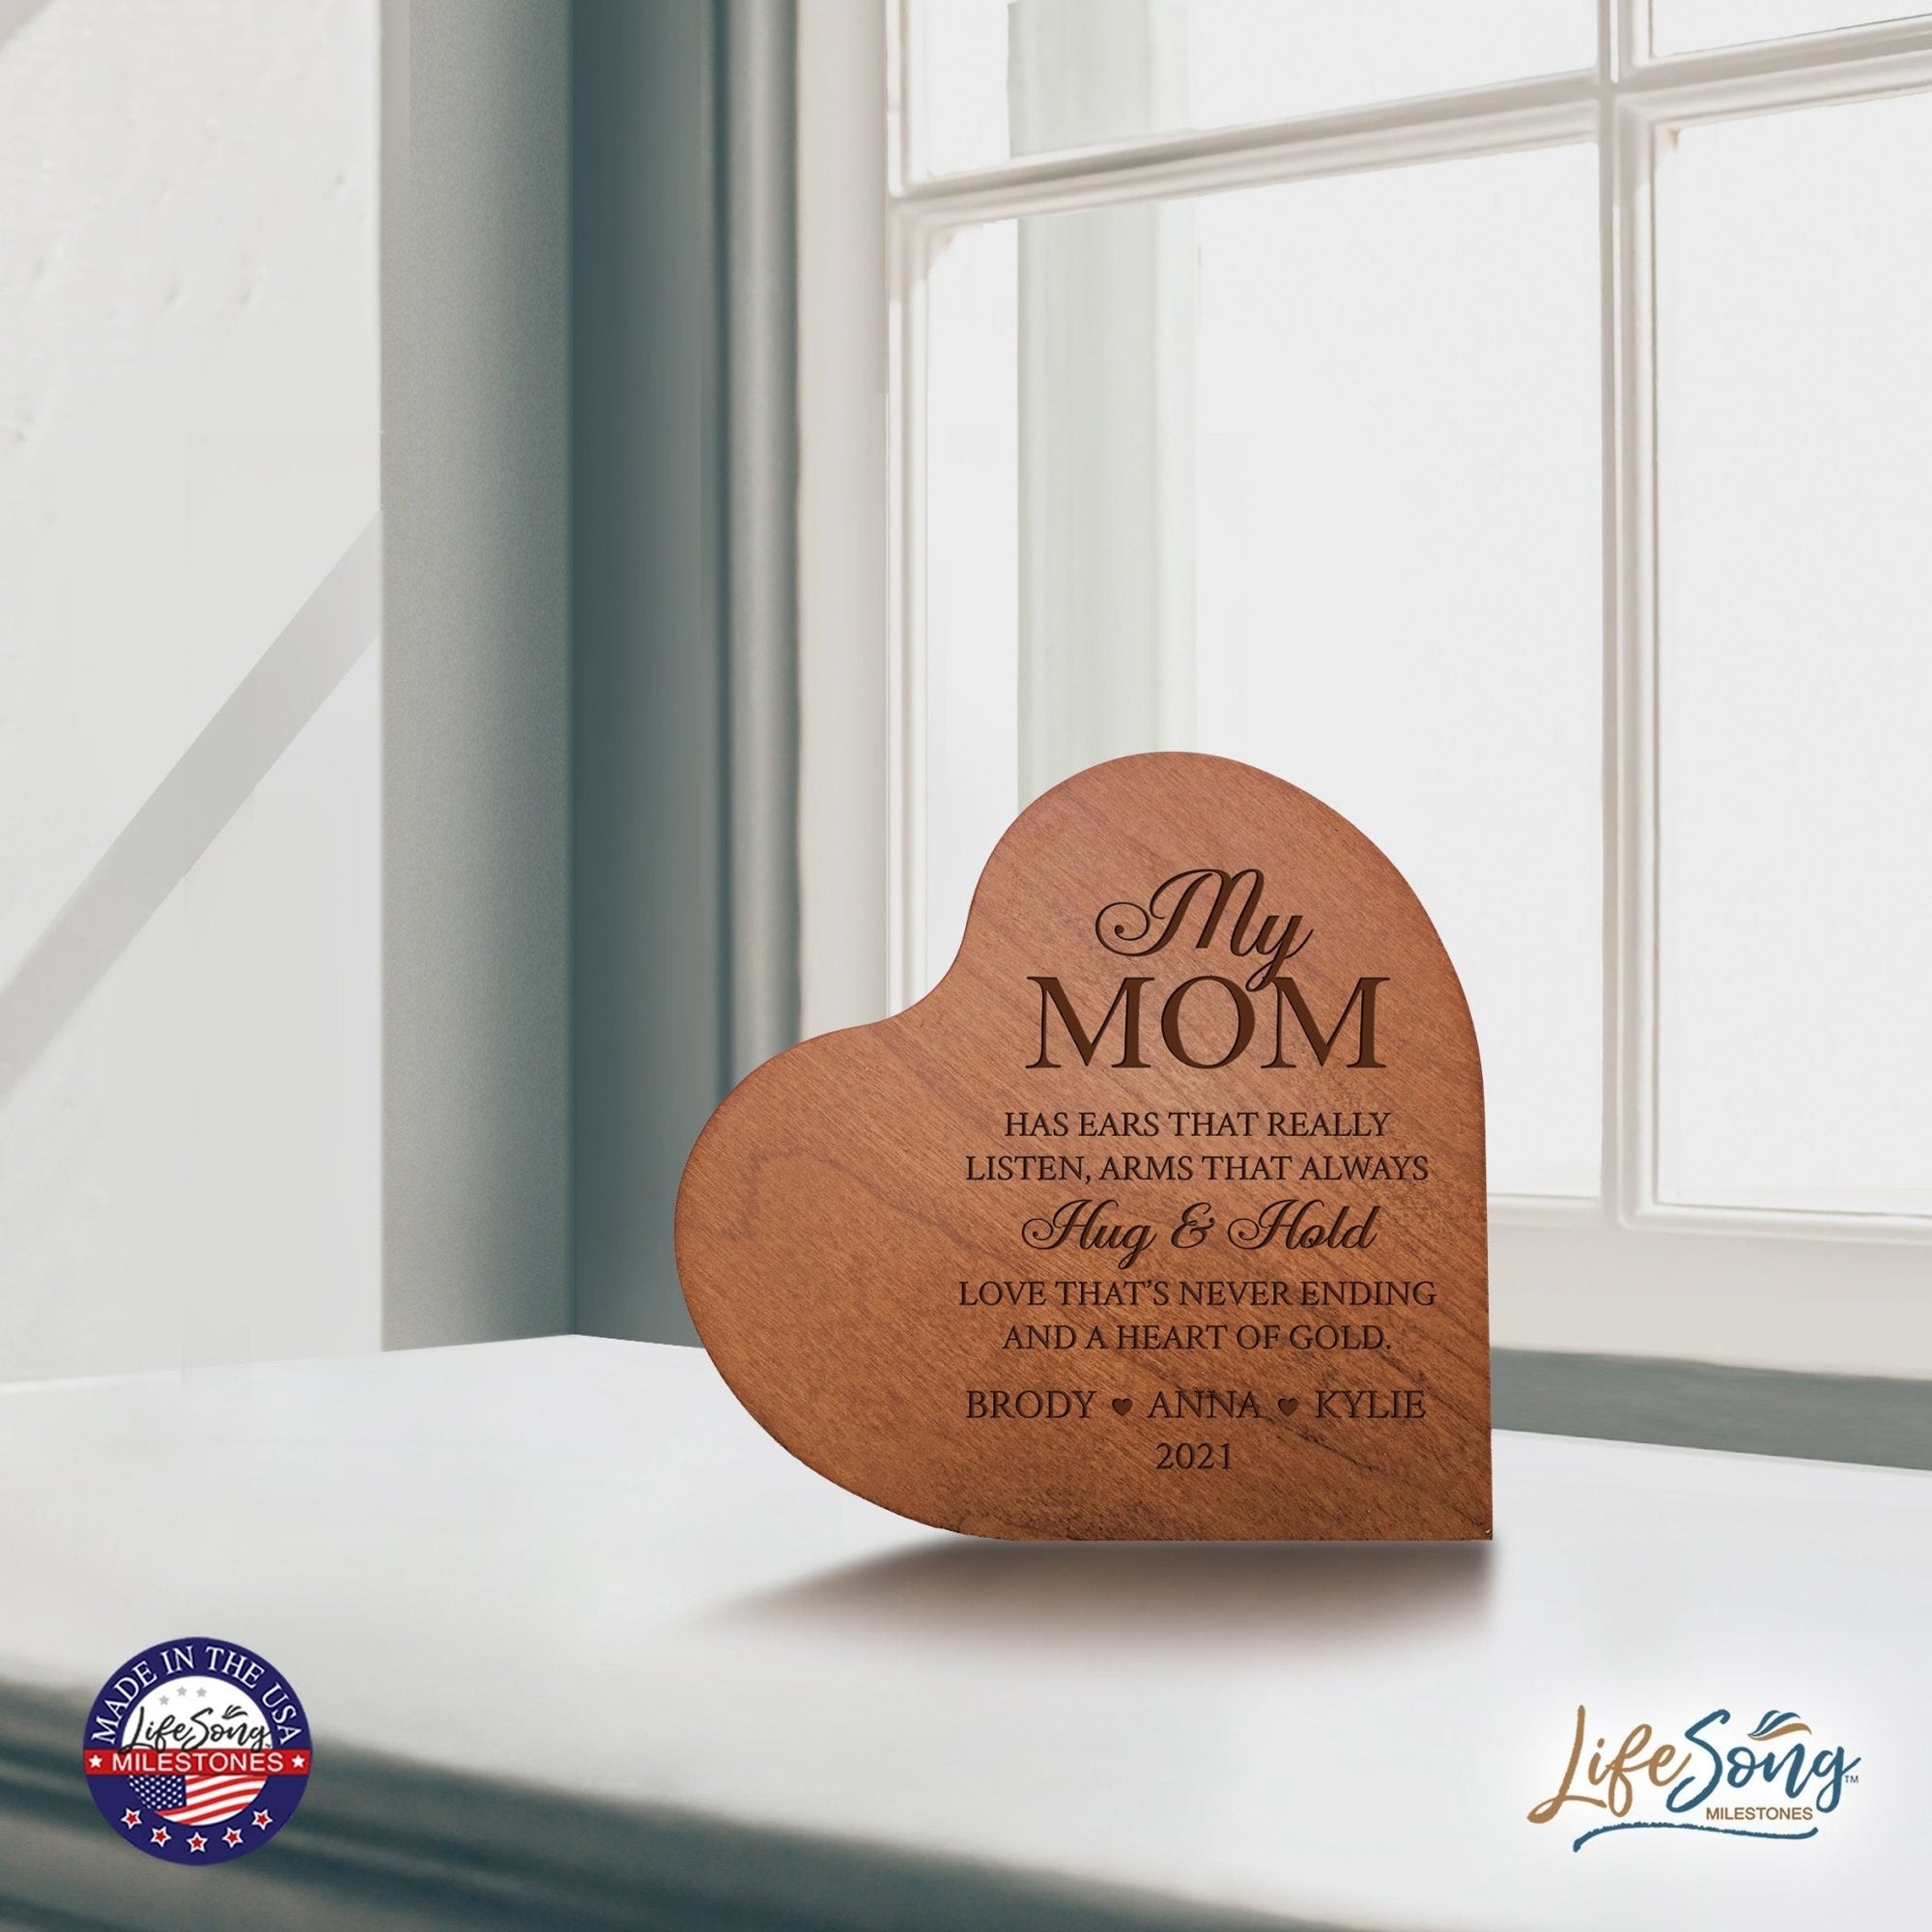 Personalized Modern Mother’s Love Solid Wood Heart Decoration With Inspirational Verse Keepsake Gift 5x5.25 - My Mom Has Ears That Really - LifeSong Milestones